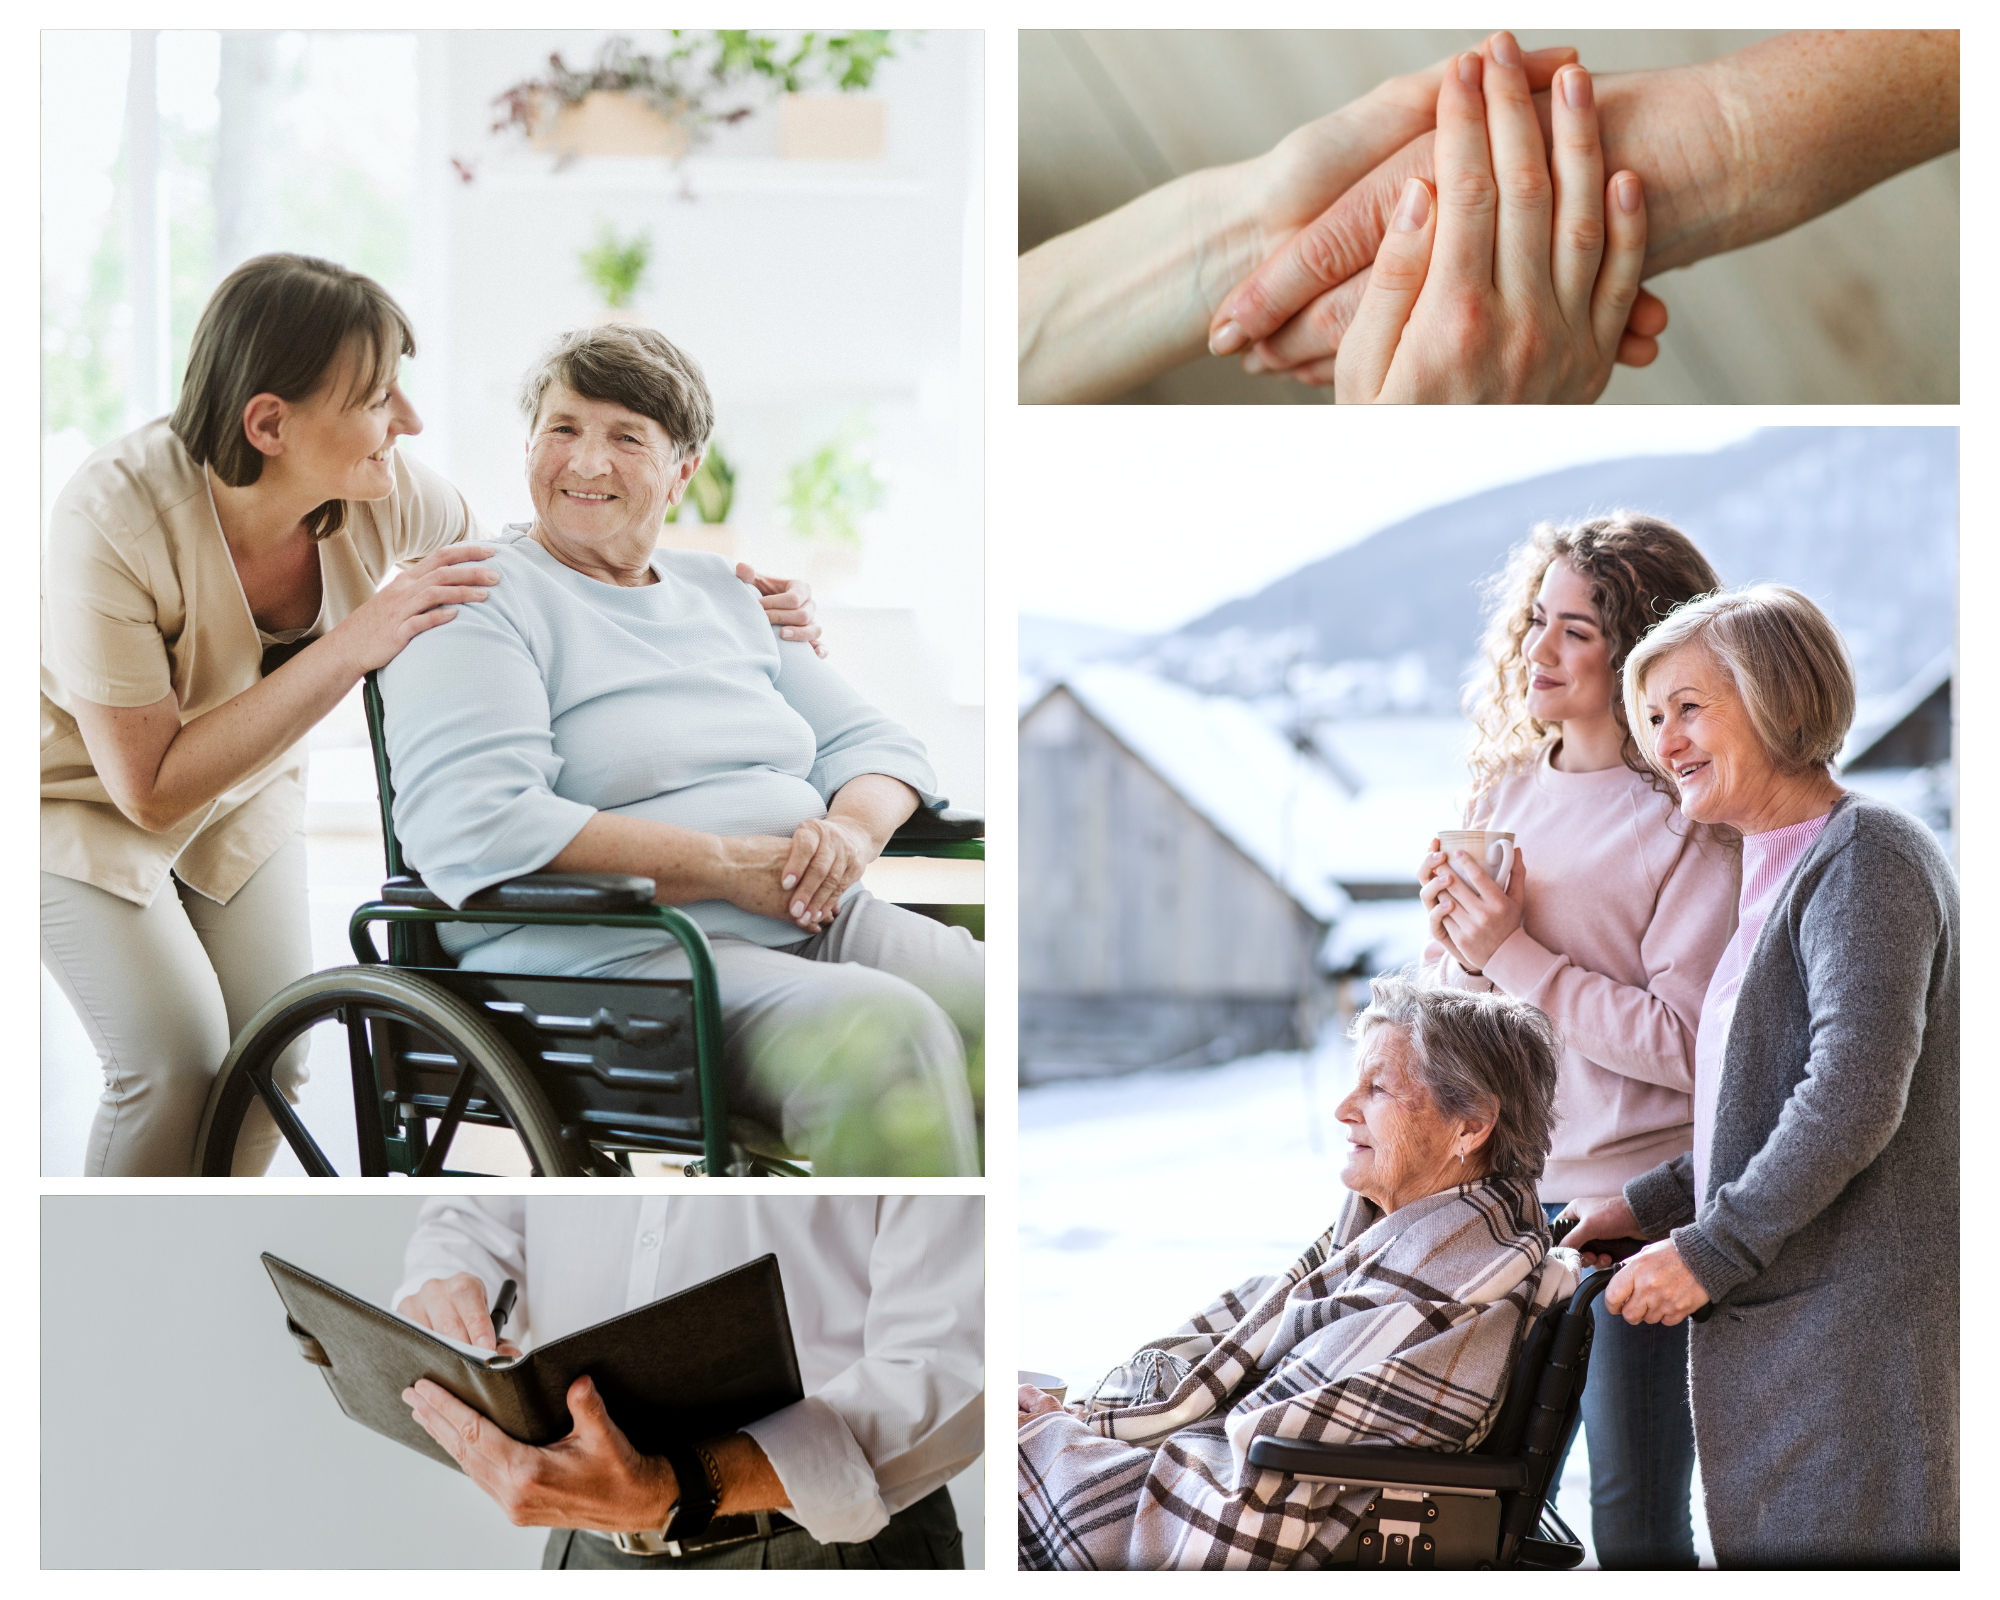 becoming a caregiver leads to a lot of transitions